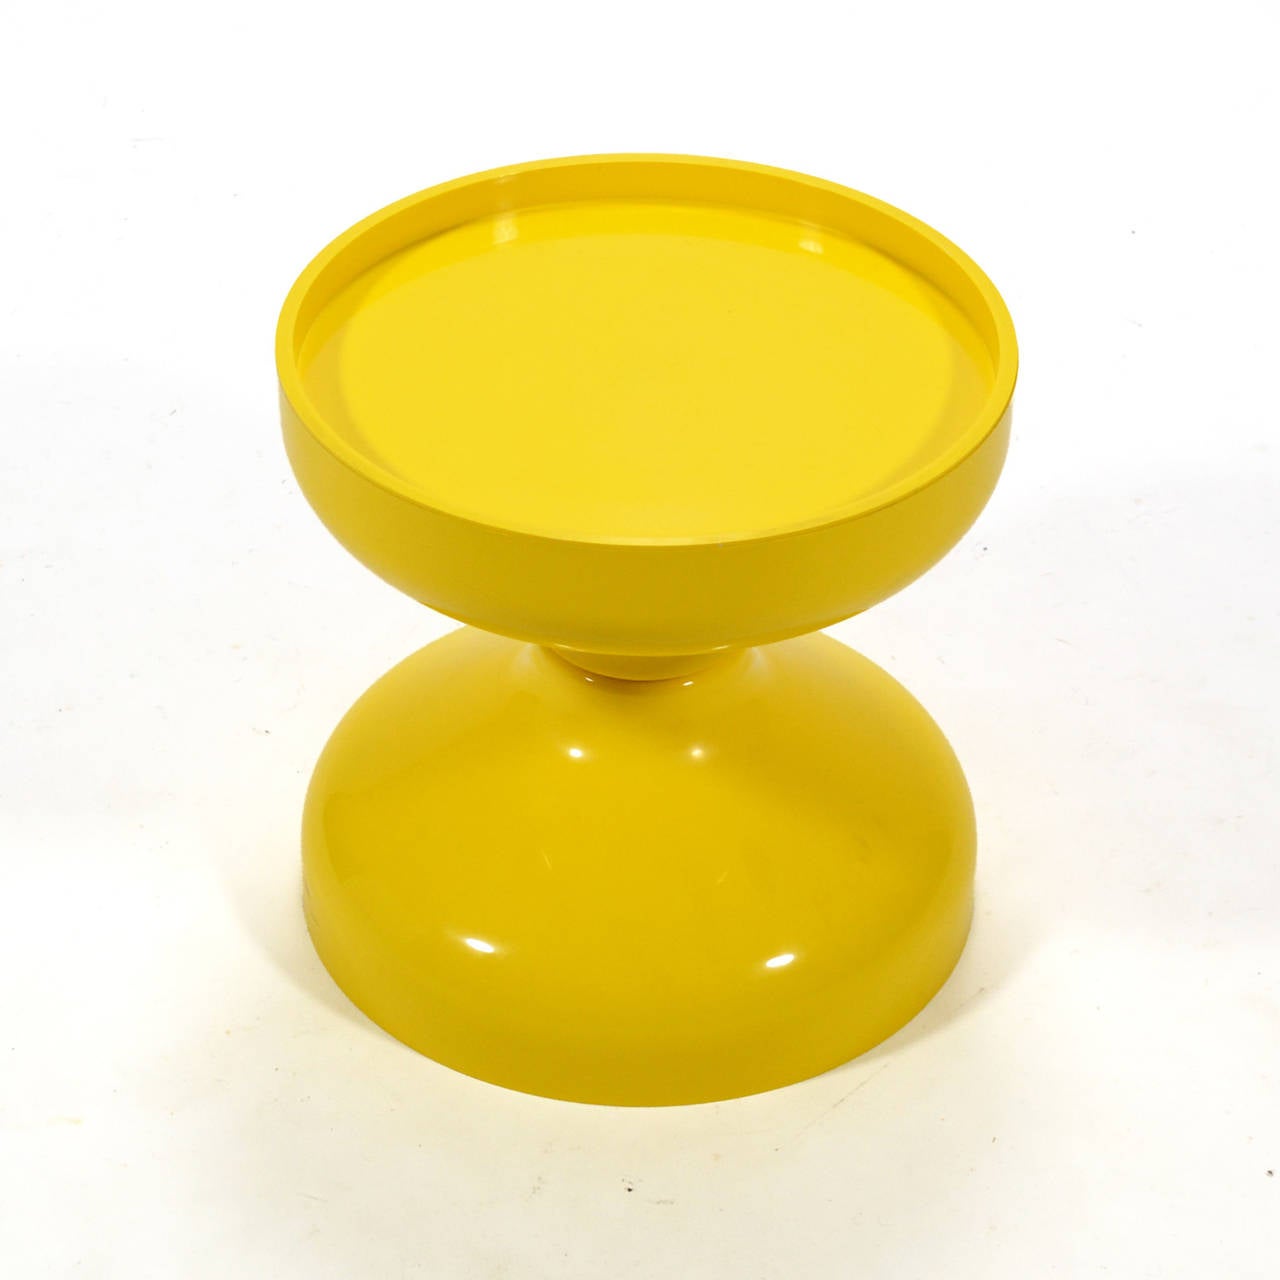 Mid-20th Century Castiglioni Rochetto Stool or Table by Kartell